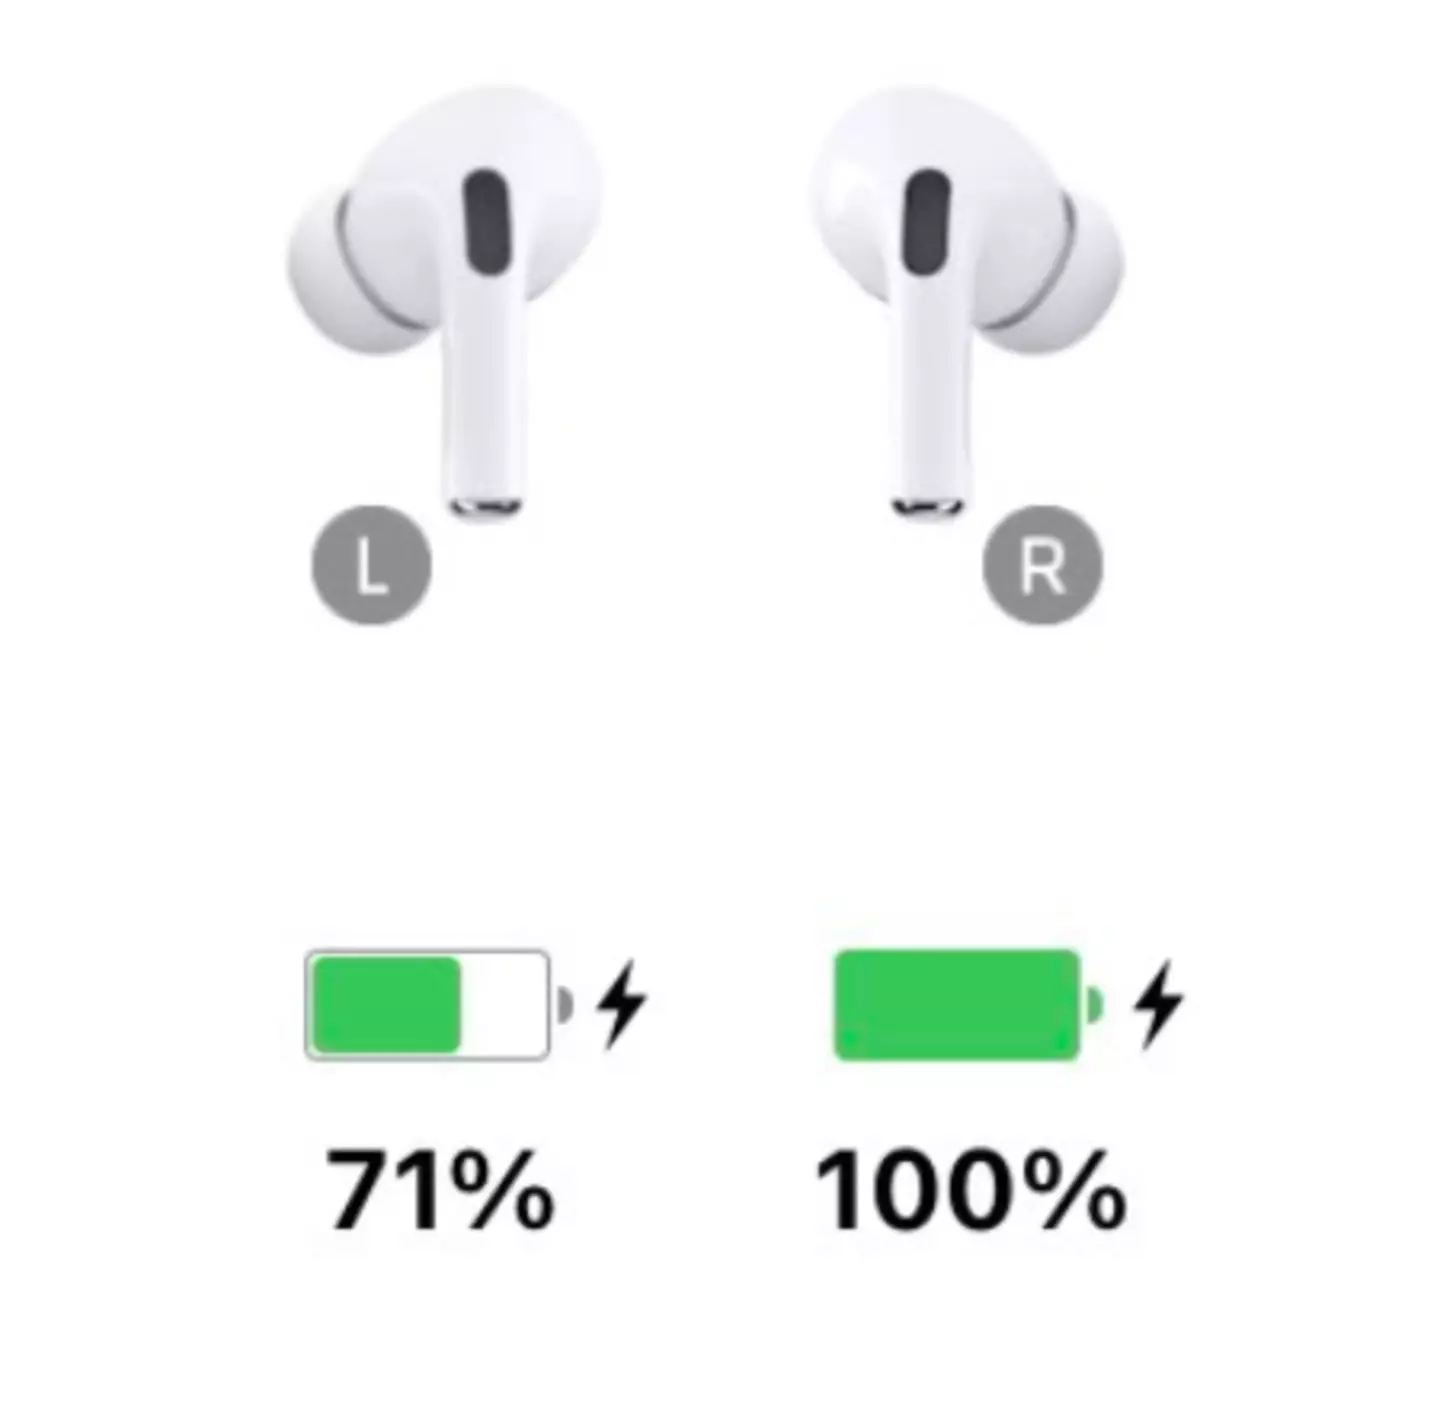 One side of your AirPods will run out of battery quicker than the other.